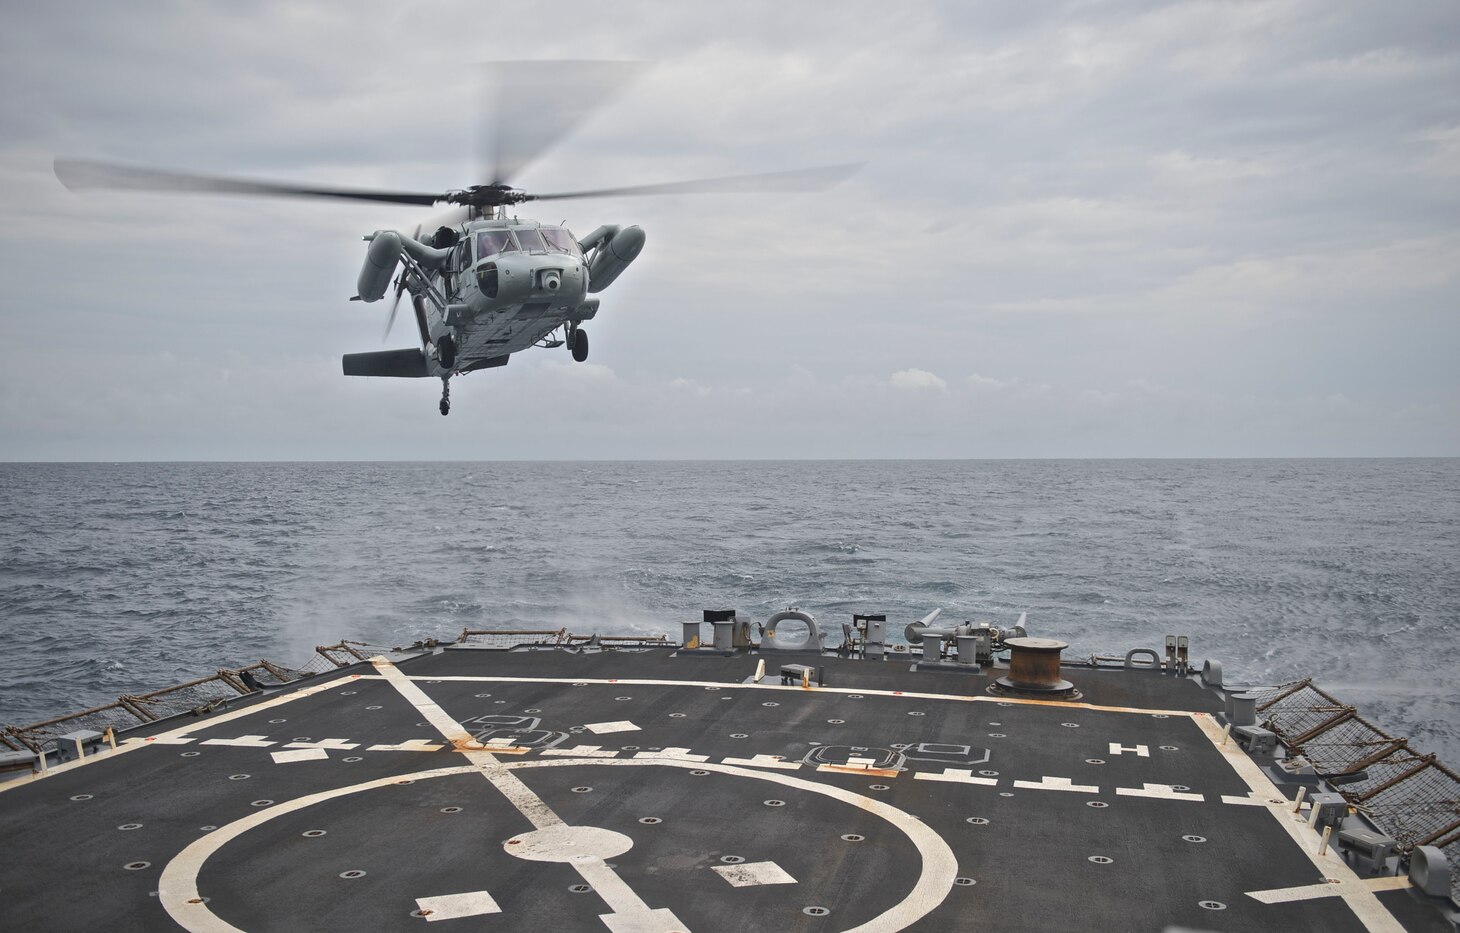 WATERS EAST OF THE KOREAN PENINSULA (Sept. 11, 2016) A Republic of Korea UH-60 Black Hawk prepares to land on the flight deck of the guided-missile destroyer USS Decatur (DDG 73).